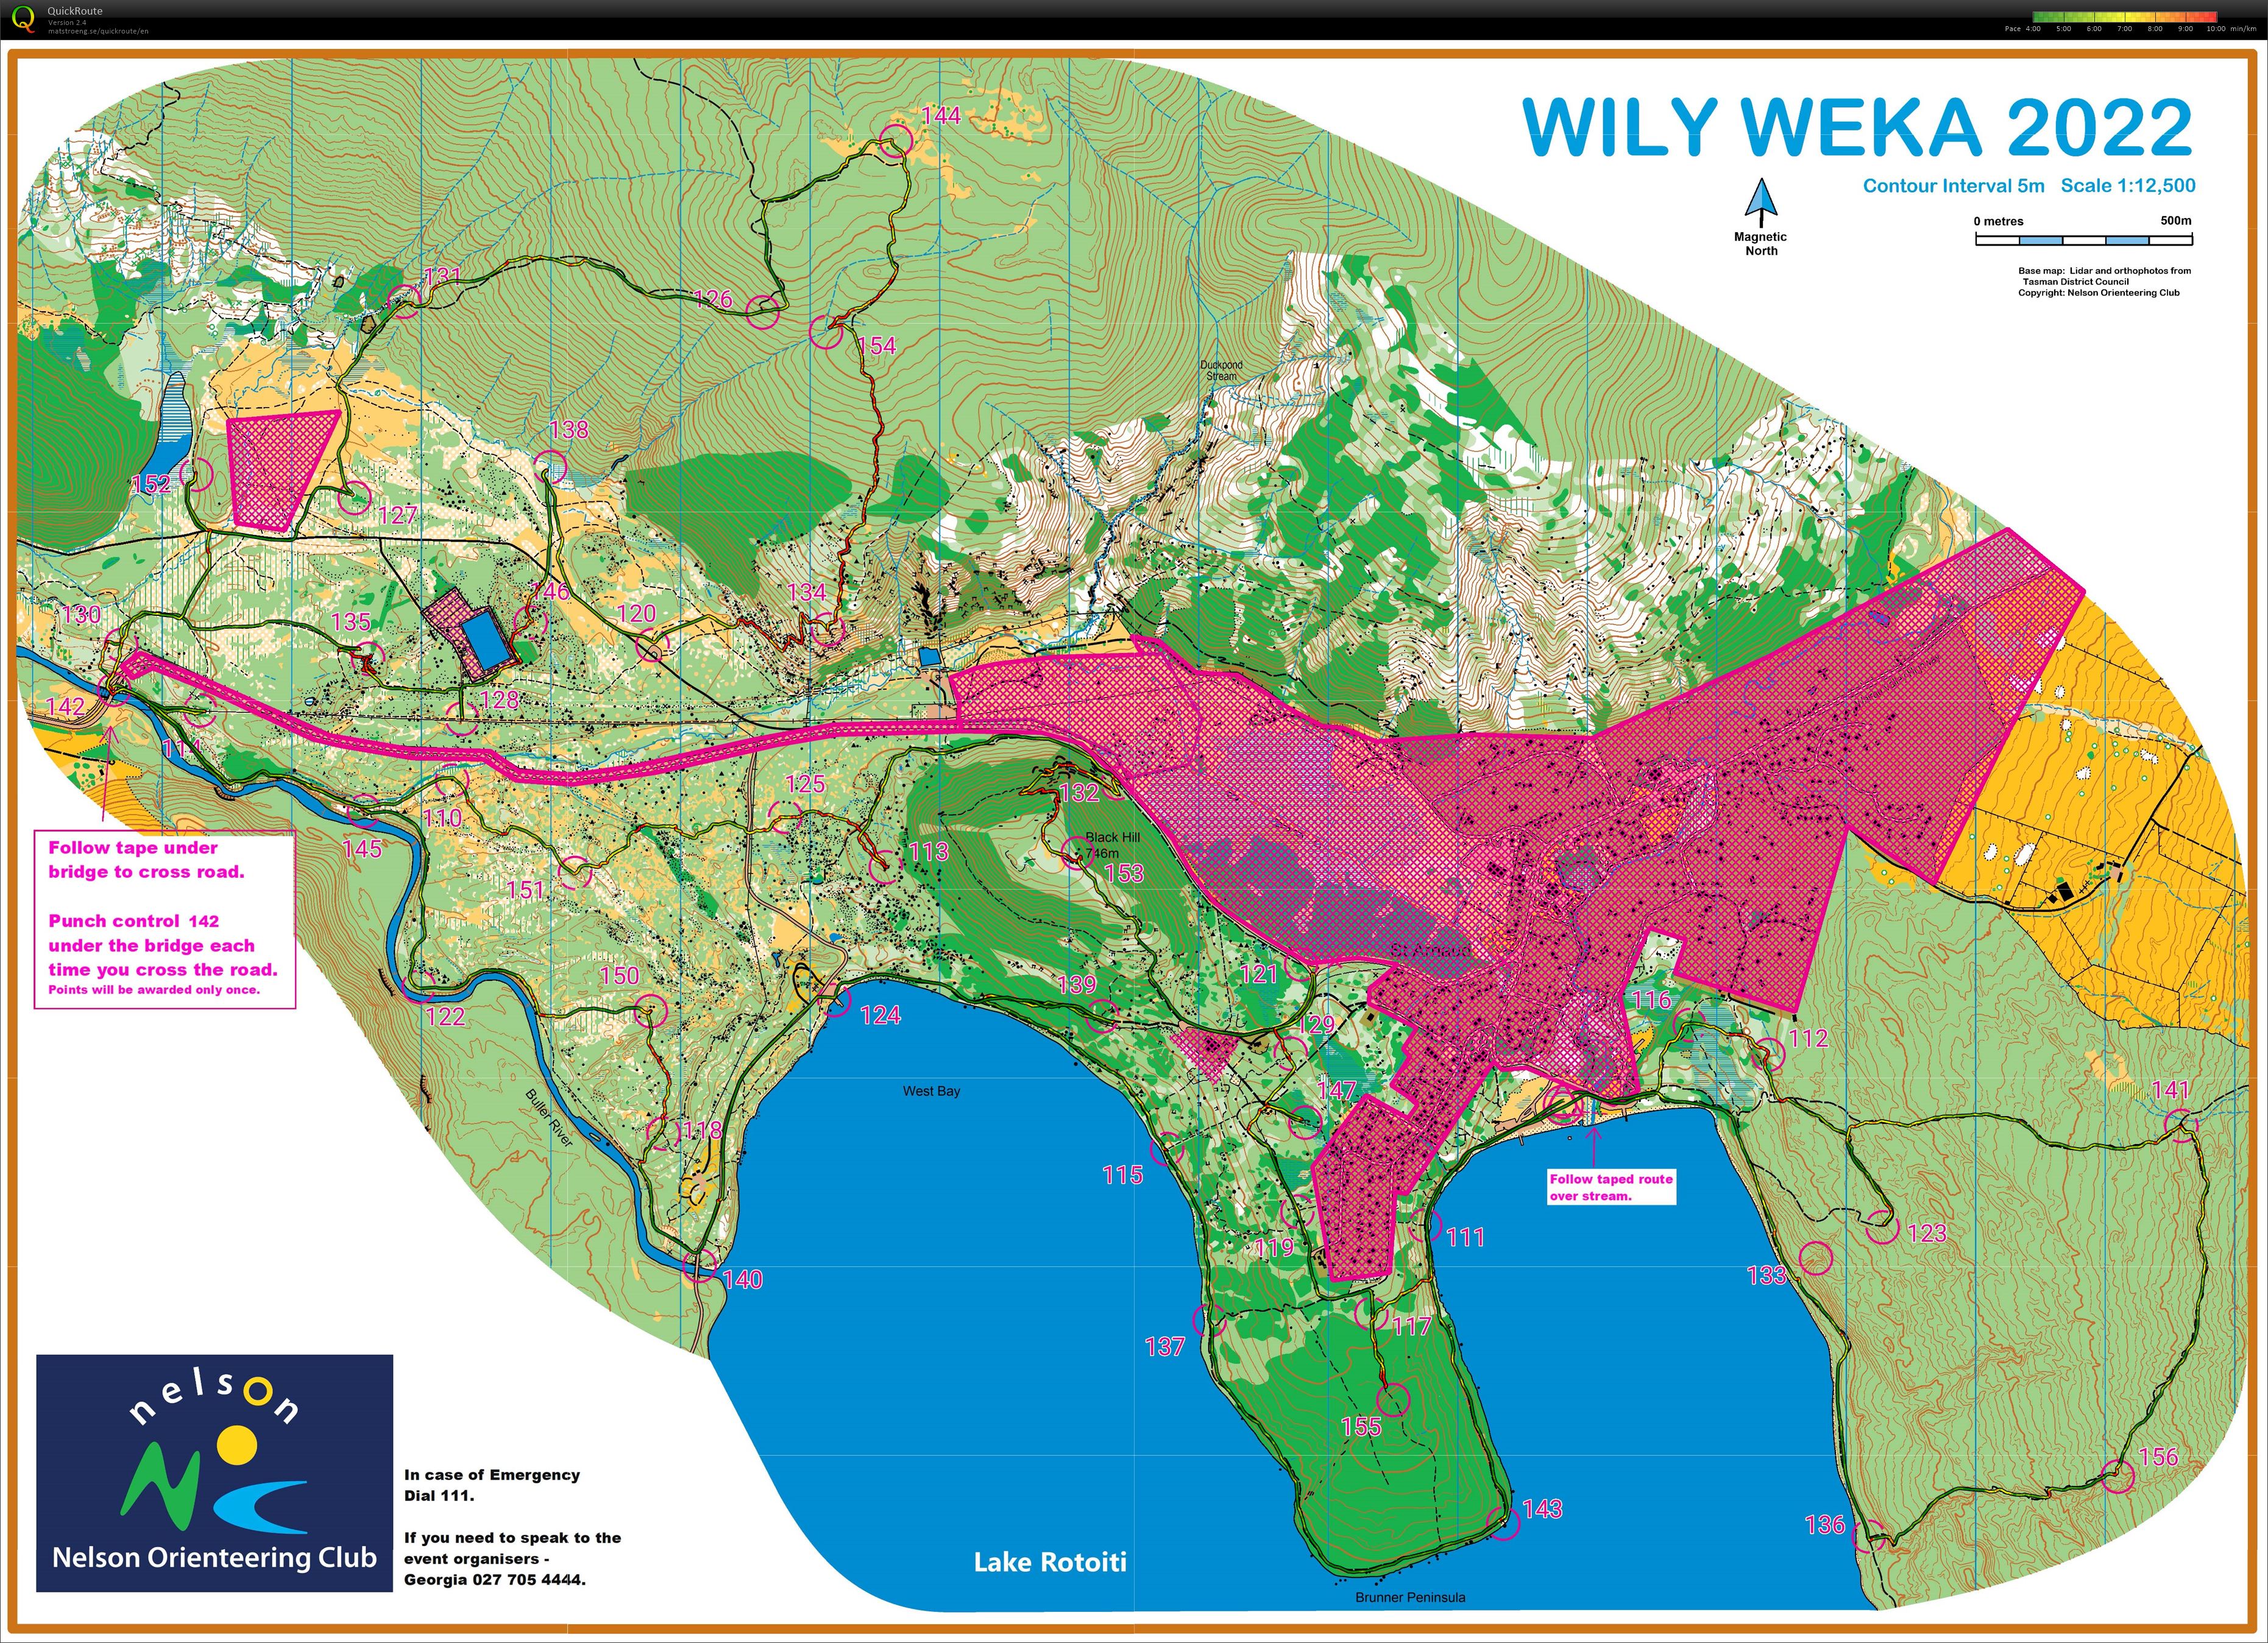 Wily Weka 2022 (10/09/2022)